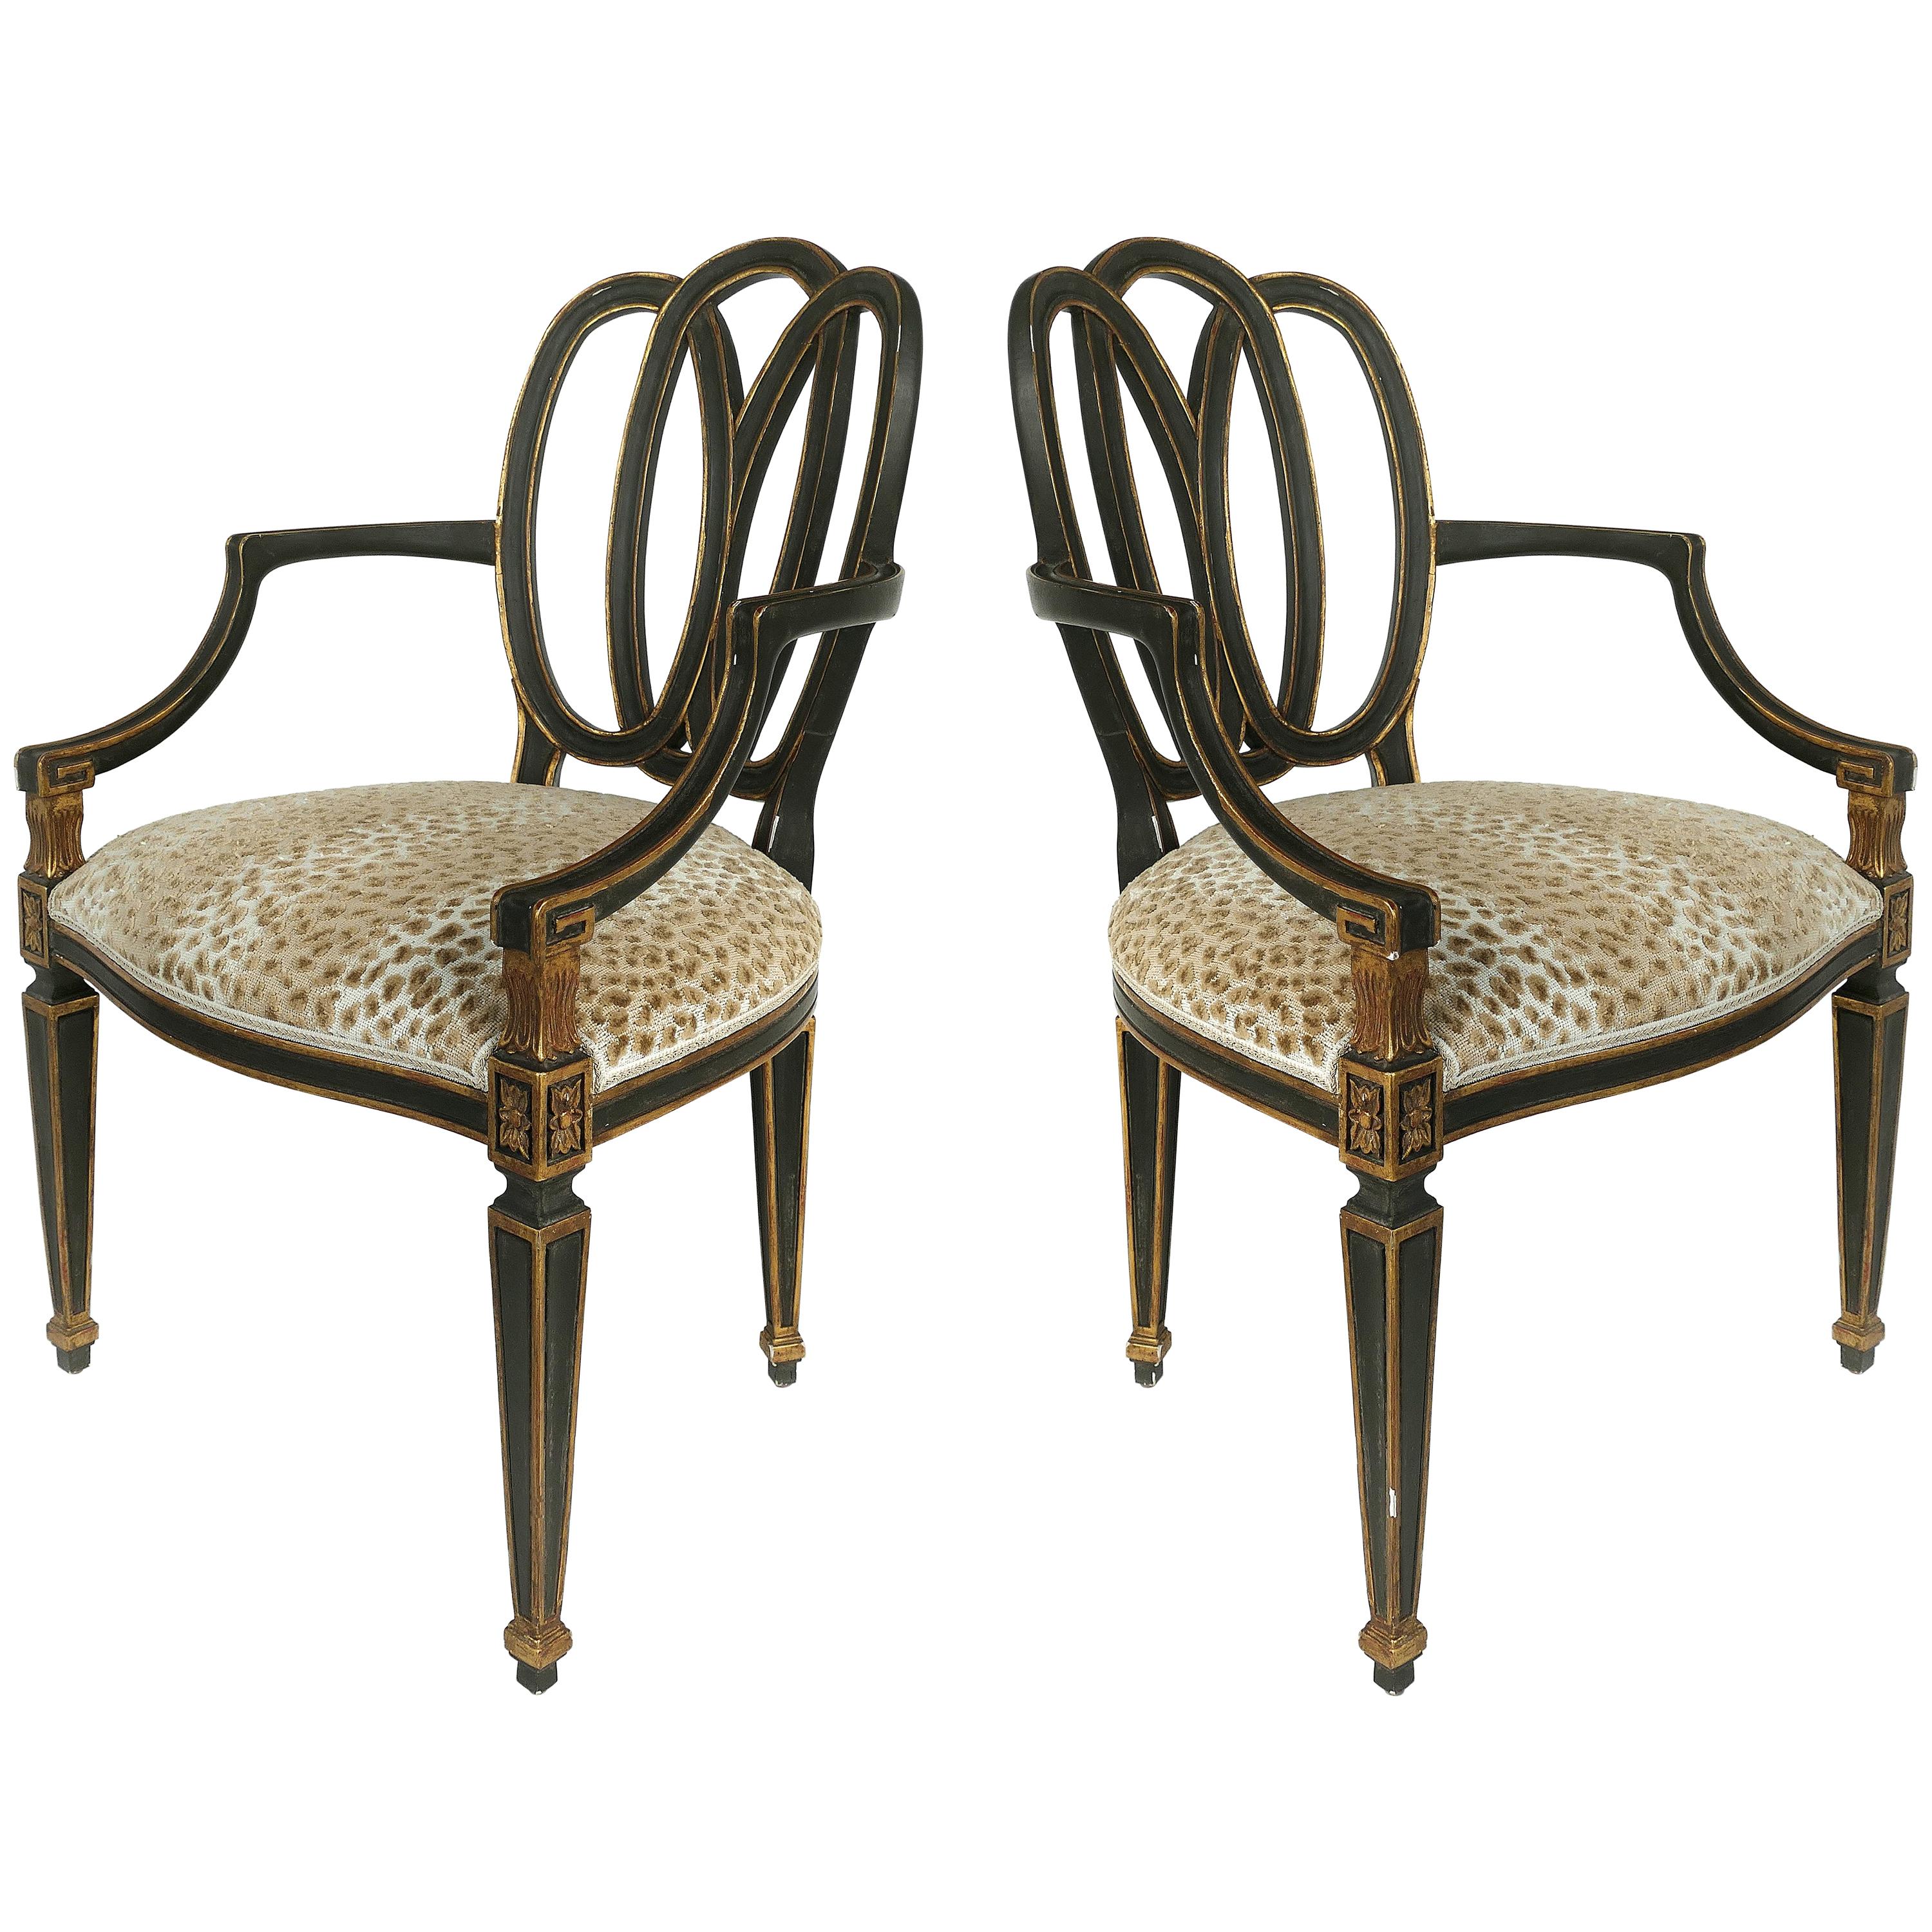 Dennis & Leen Ebonized and Parcel-Gilt Armchairs in the Neoclassical Style